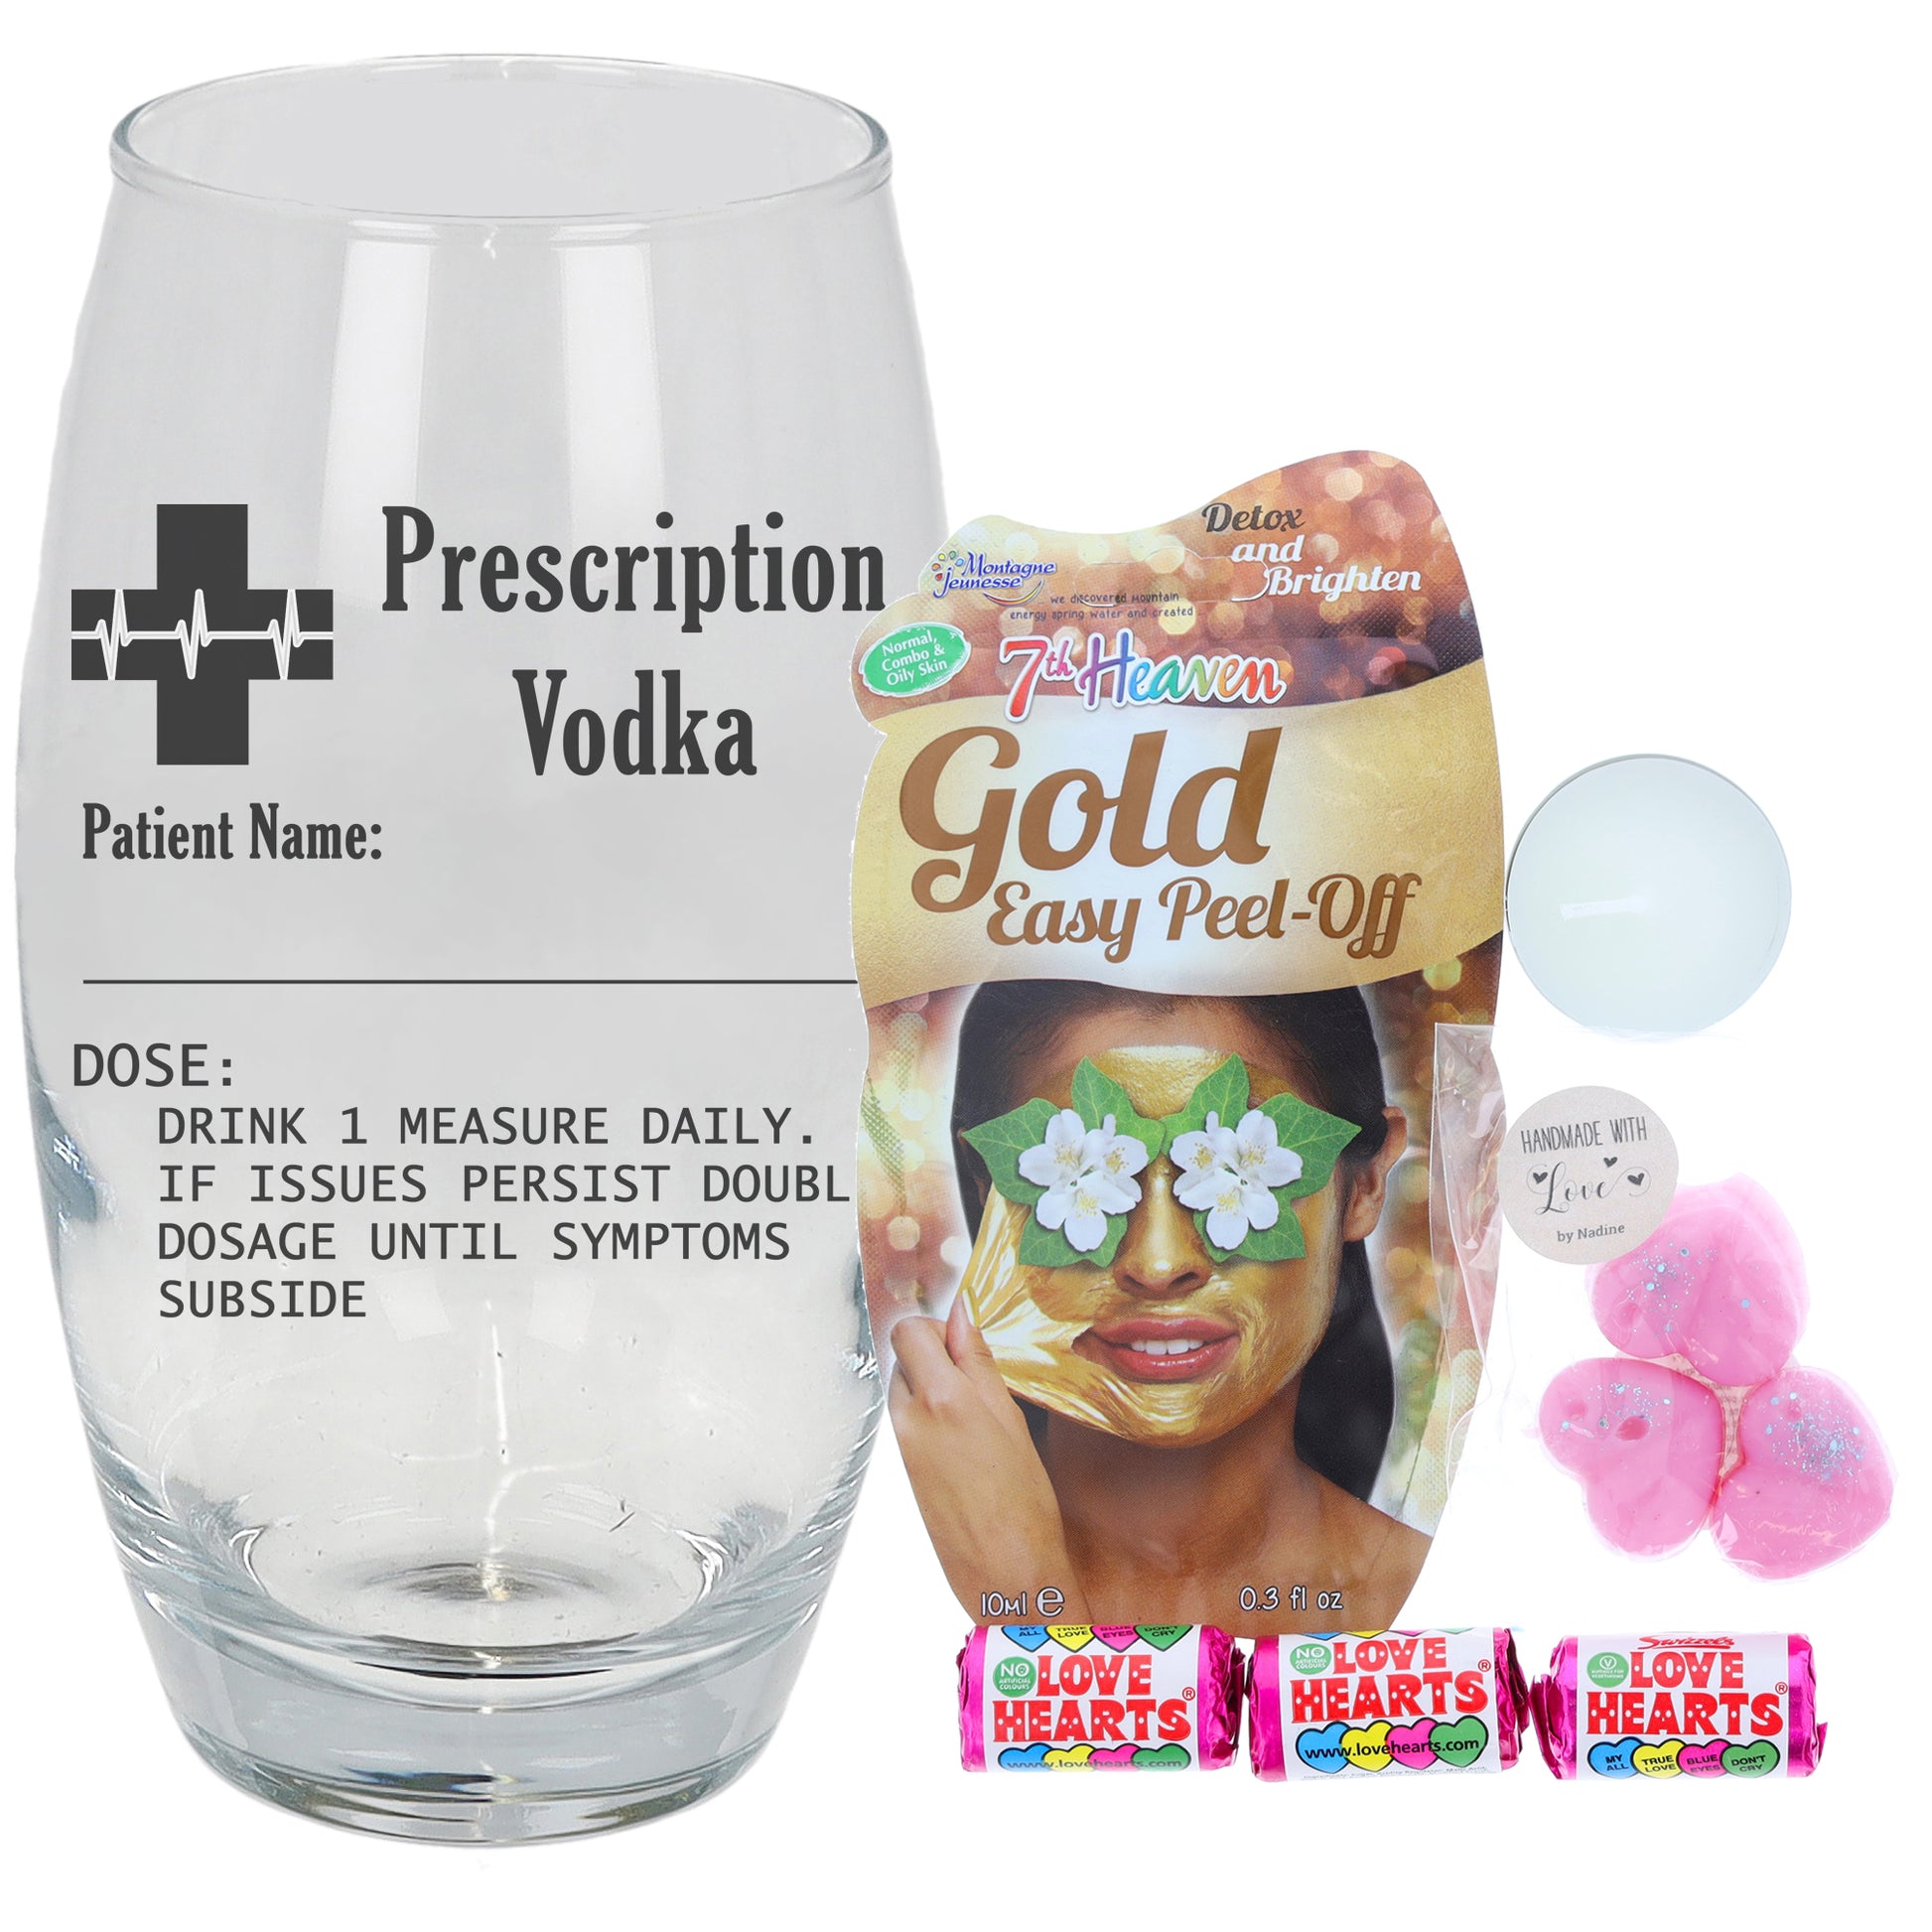 Personalised Engraved Prescription Vodka Glass with any Name  - Always Looking Good - Filled with Ladies Pamper Products Large Tondo 